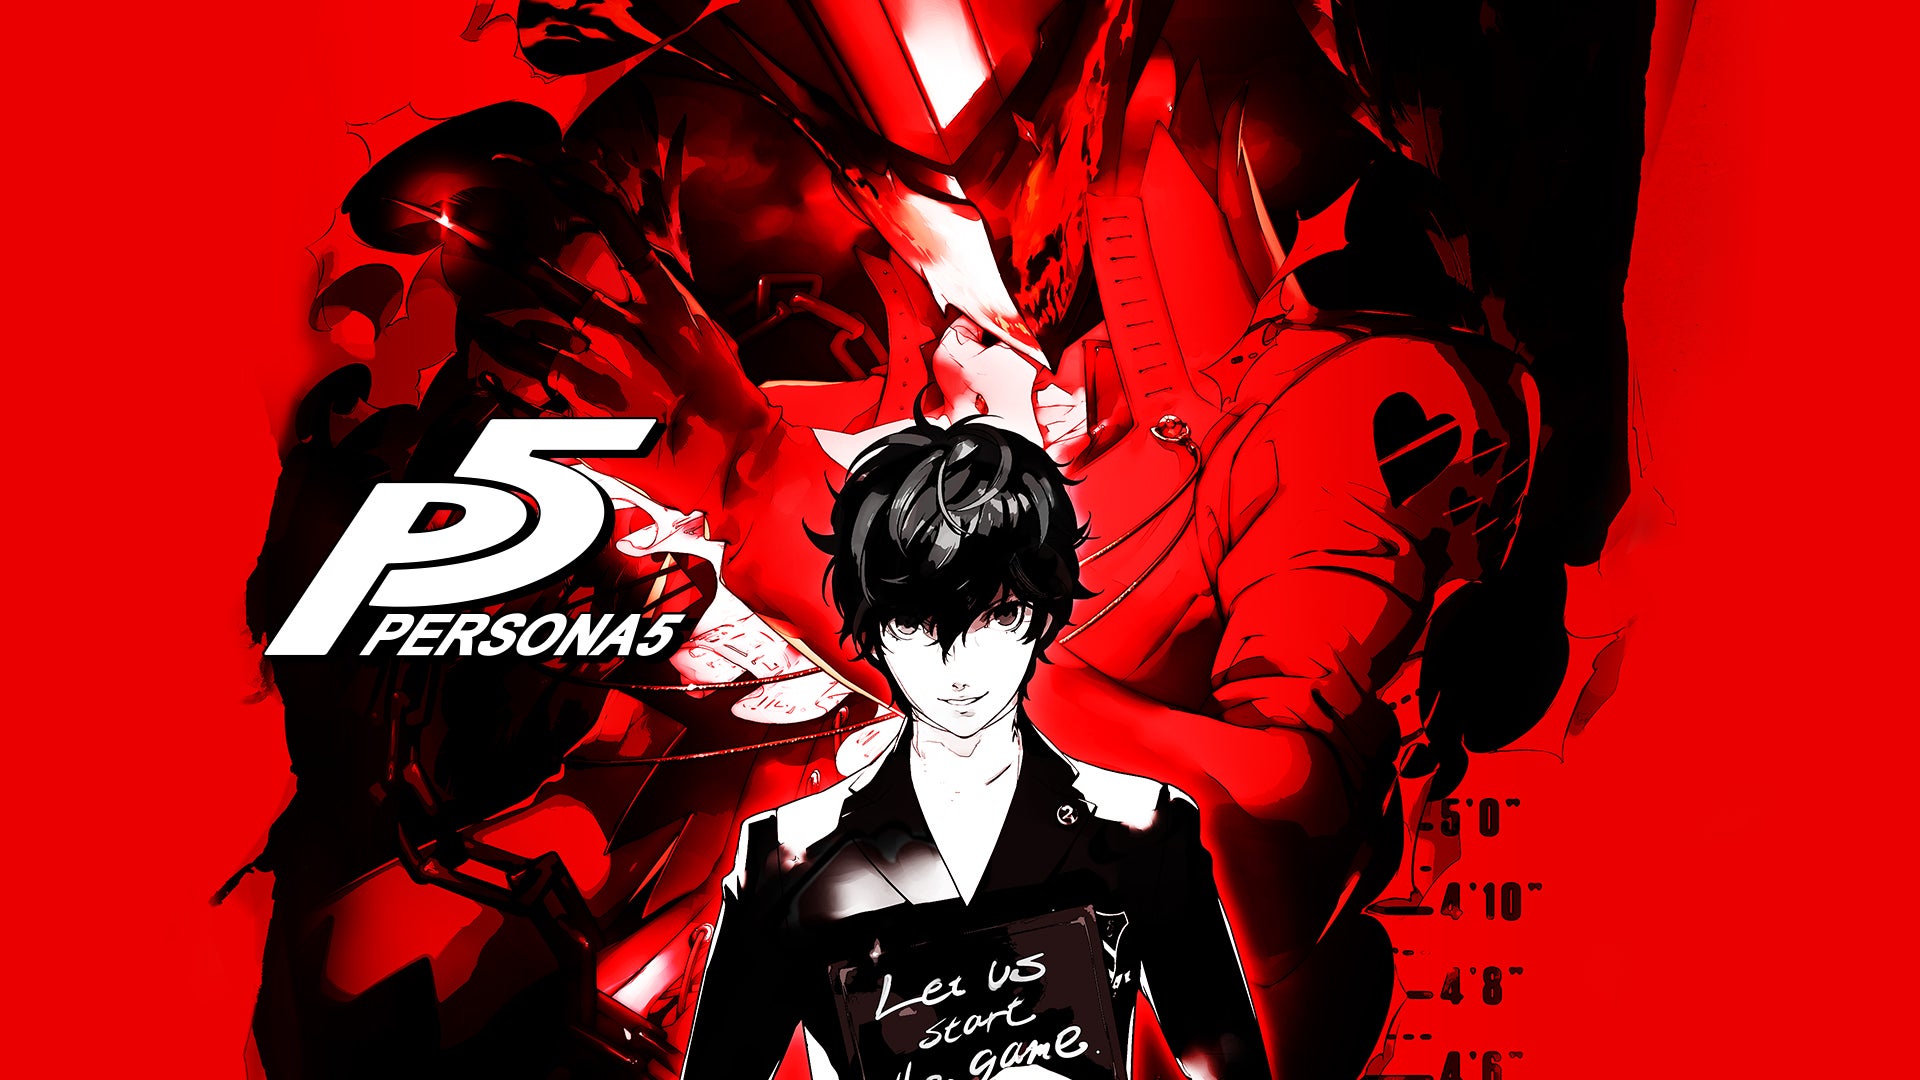 Image for Jelly Deals: Persona 5 discounted to £35.99 on PS4